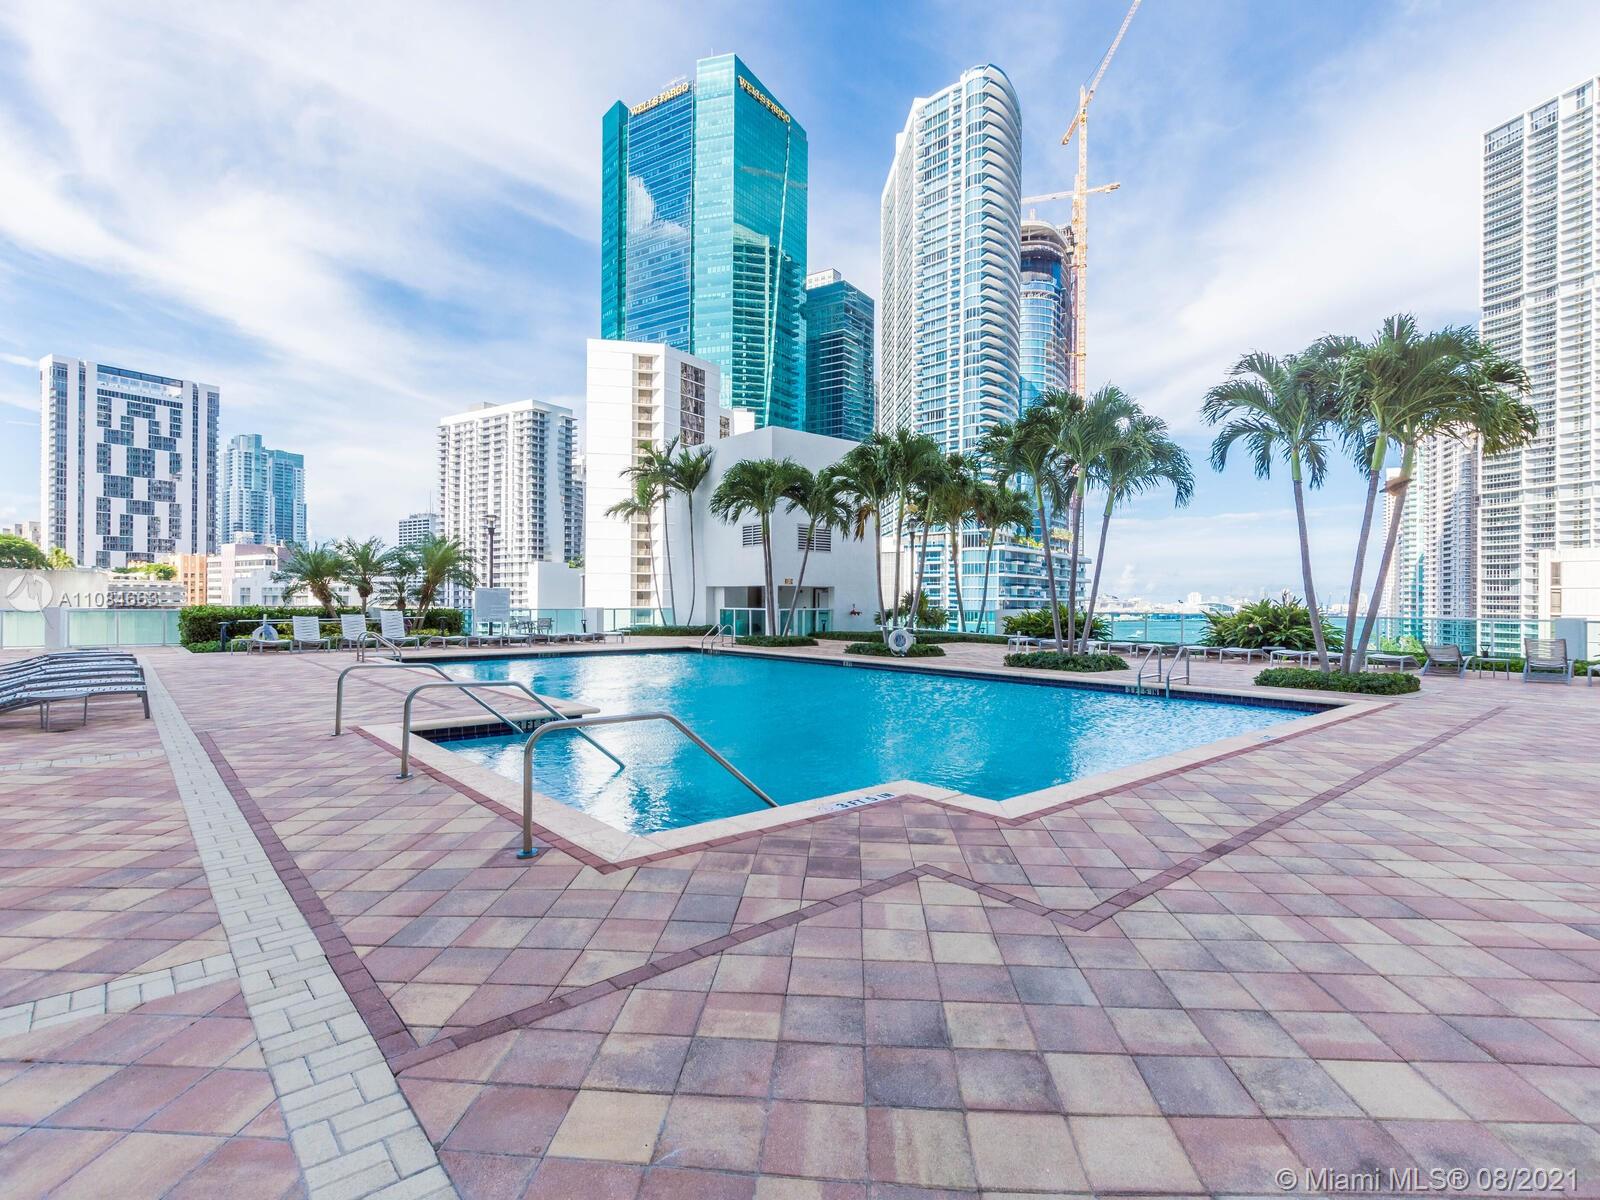 Brickell on the River South image #67